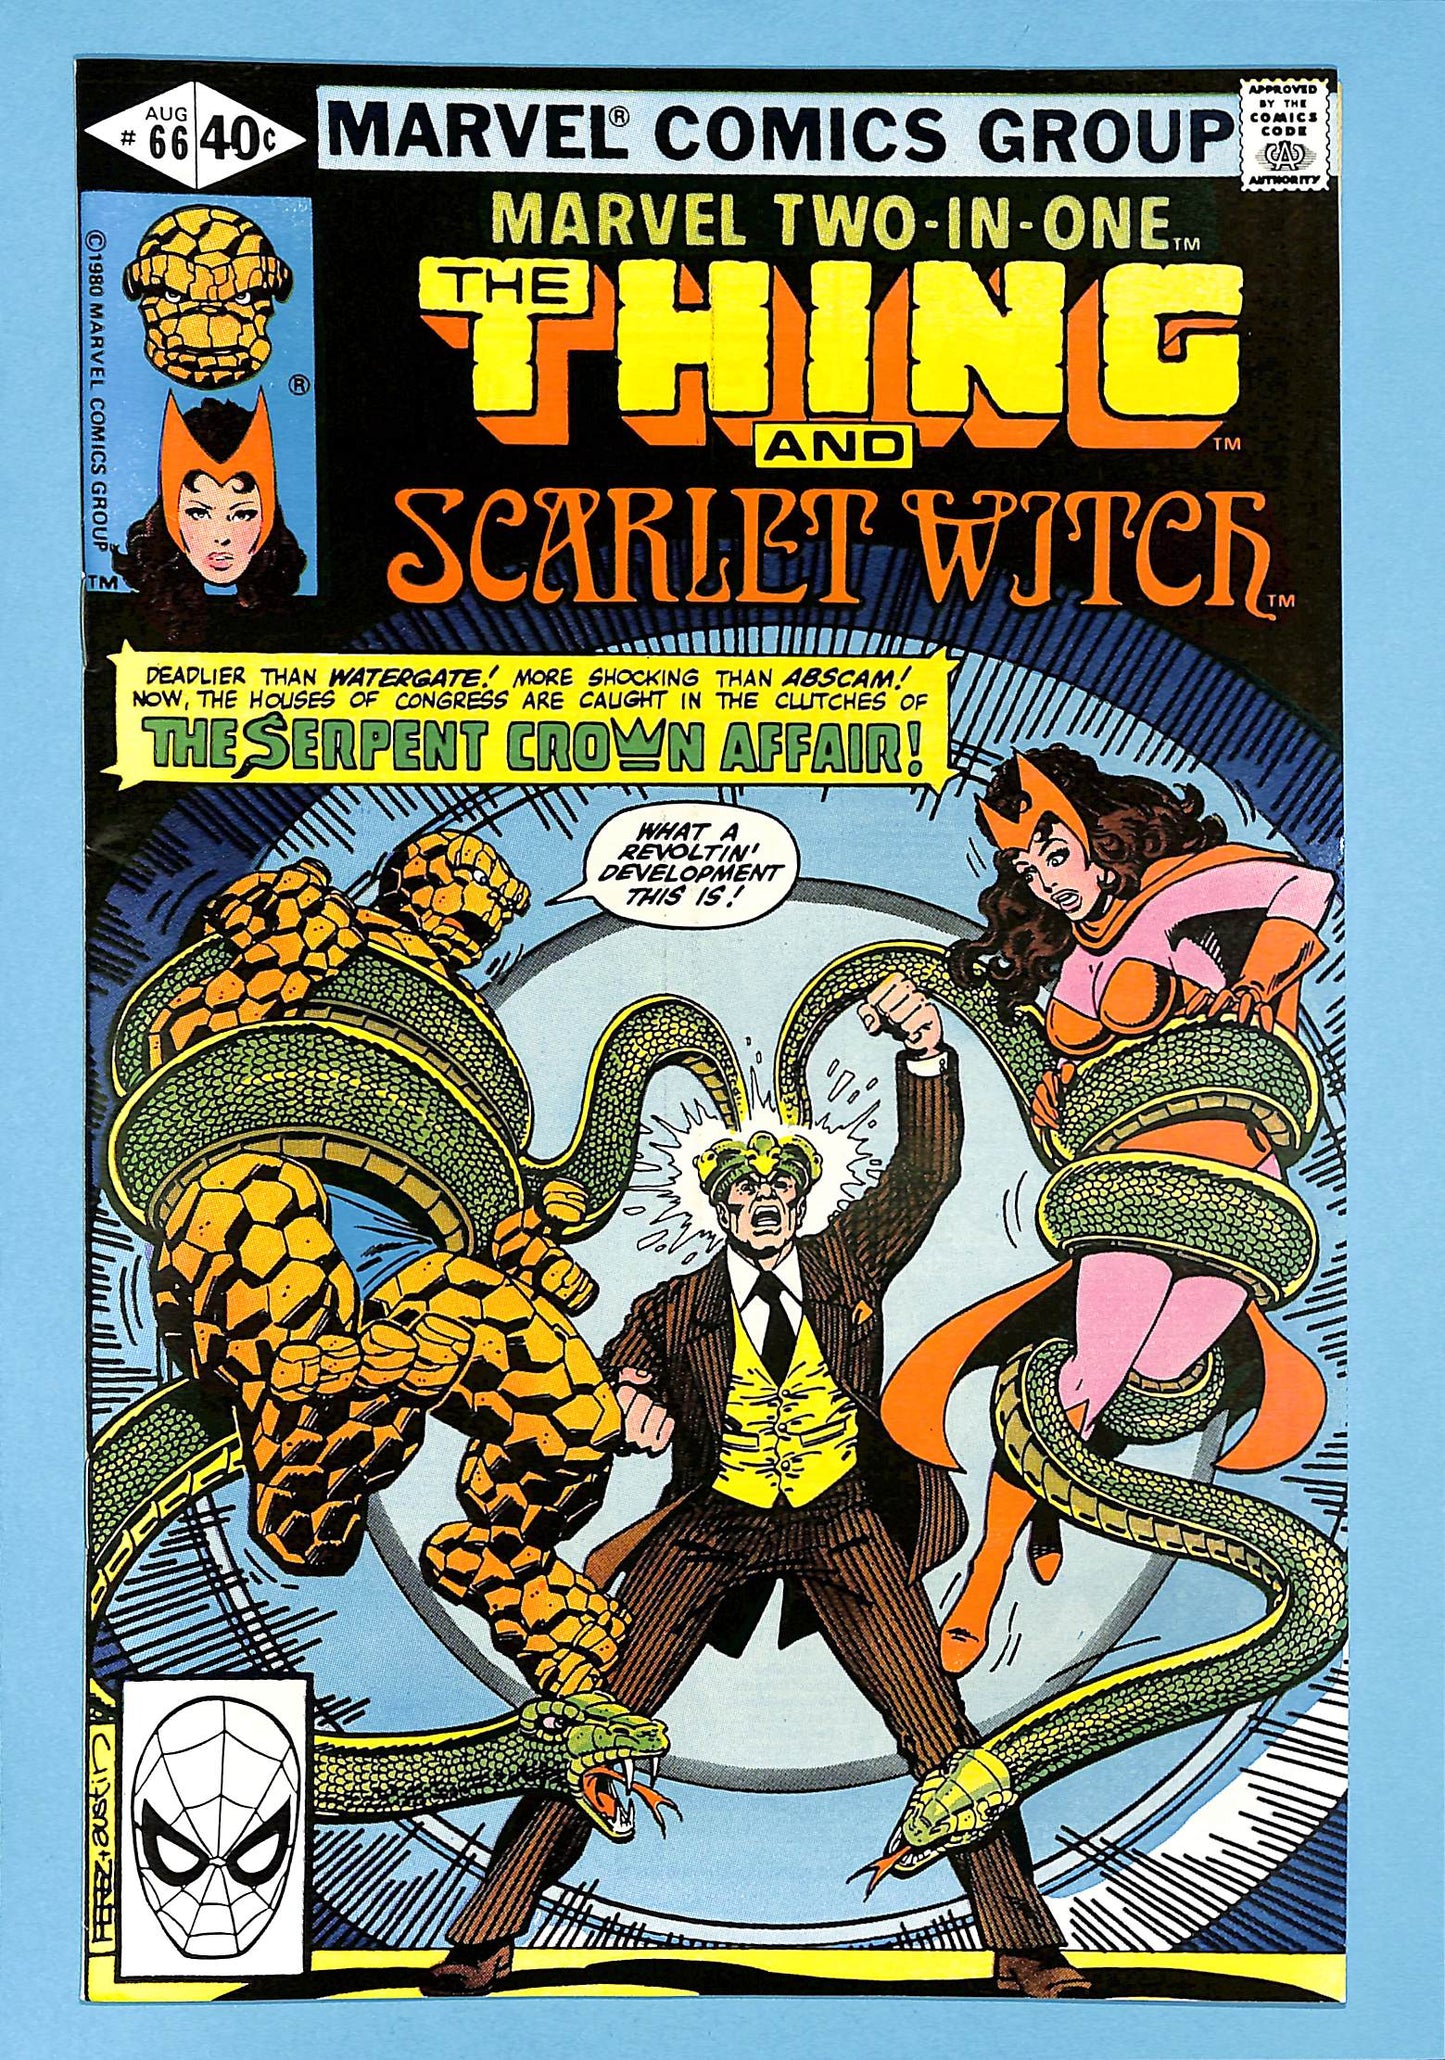 Marvel Two-In-One #66 The Thing and Scarlet Witch (1)